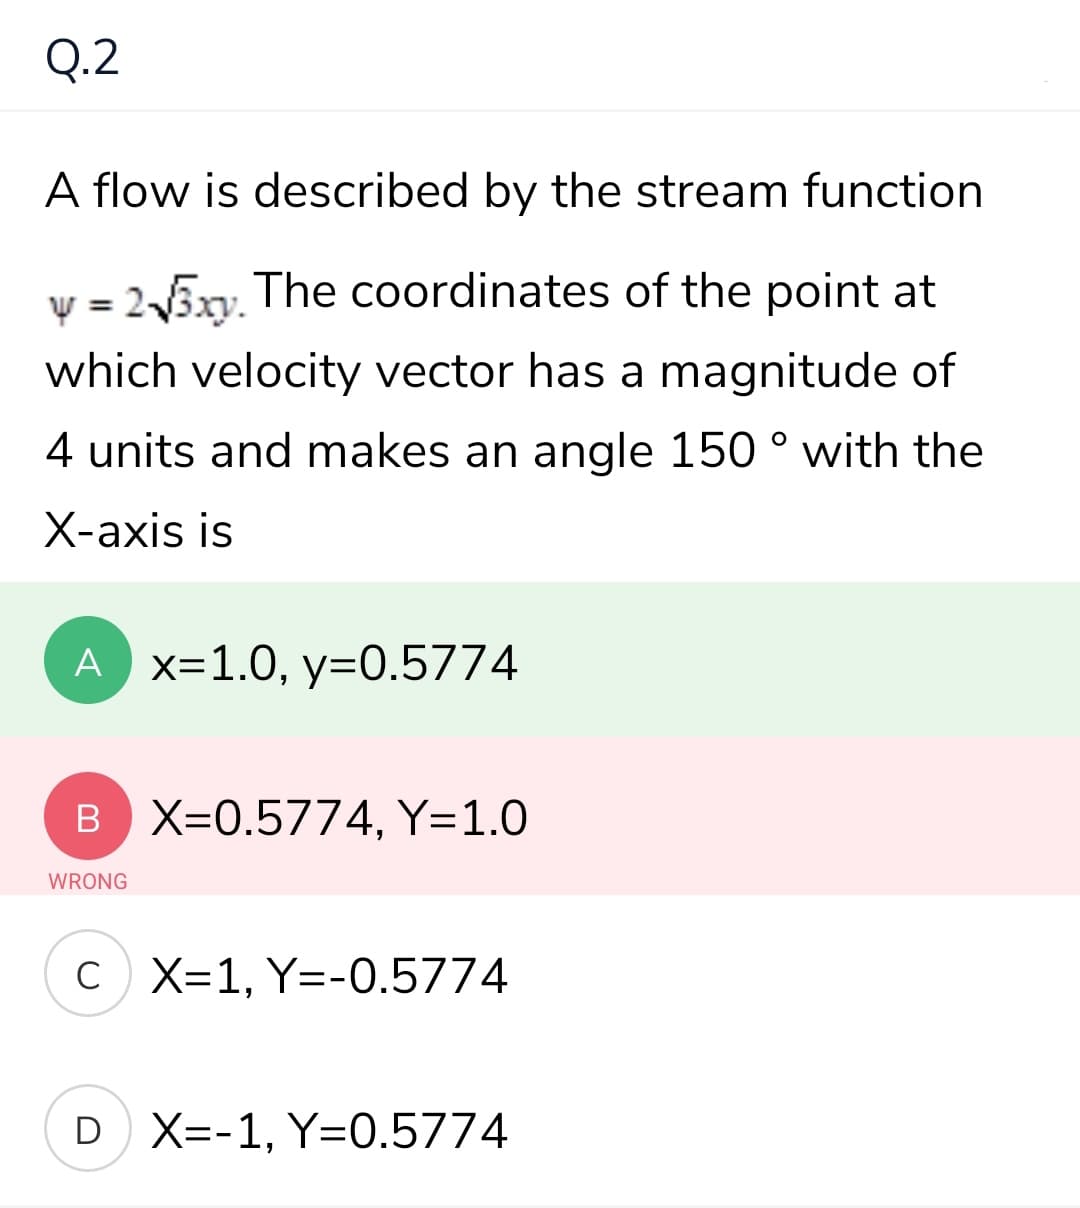 Q.2
A flow is described by the stream function
v = 25xv, The coordinates of the point at
which velocity vector has a magnitude of
4 units and makes an angle 150 ° with the
X-axis is
A x=1.0, y=0.5774
B X=0.5774, Y=1.0
WRONG
C X=1, Y=-0.5774
D X=-1, Y=0.5774
